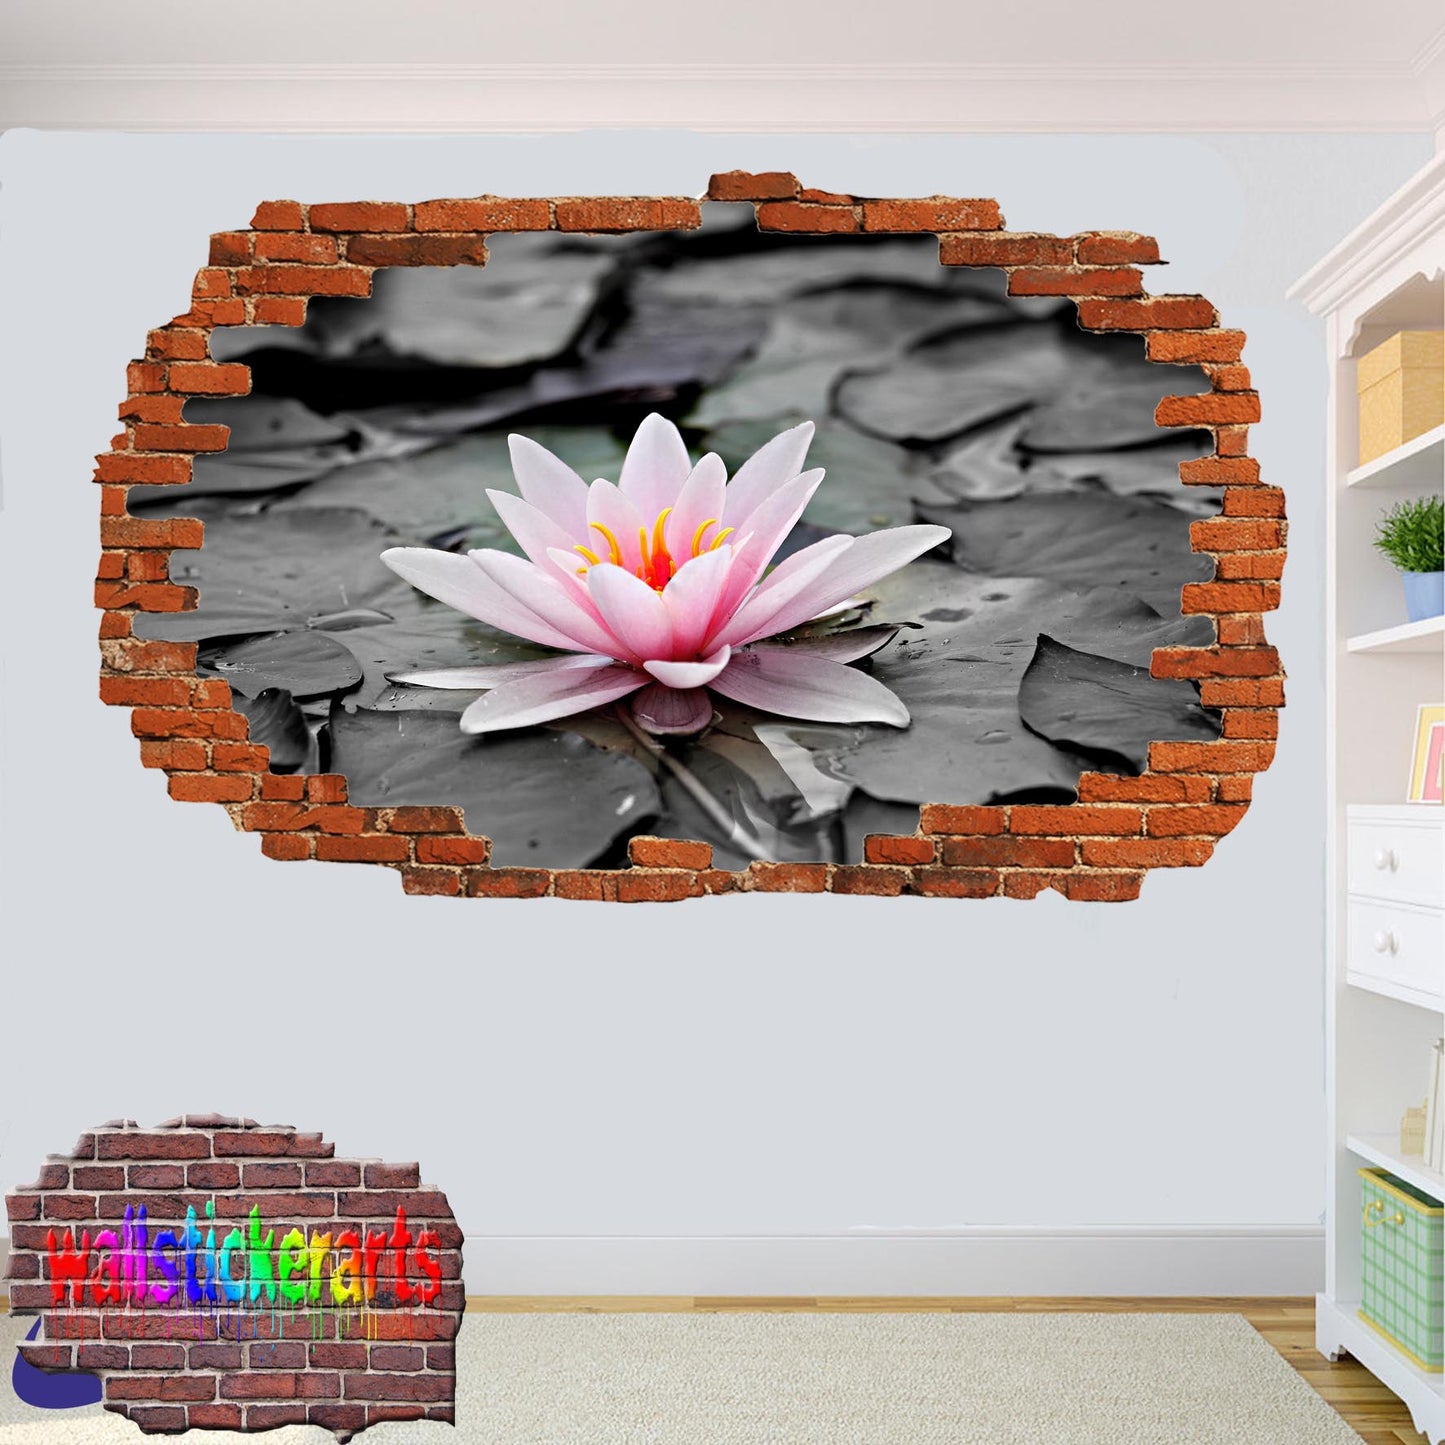 Lotus Flower in Swamp 3d Art Wall Sticker Mural Room Office Shop Decoration Decal YC6